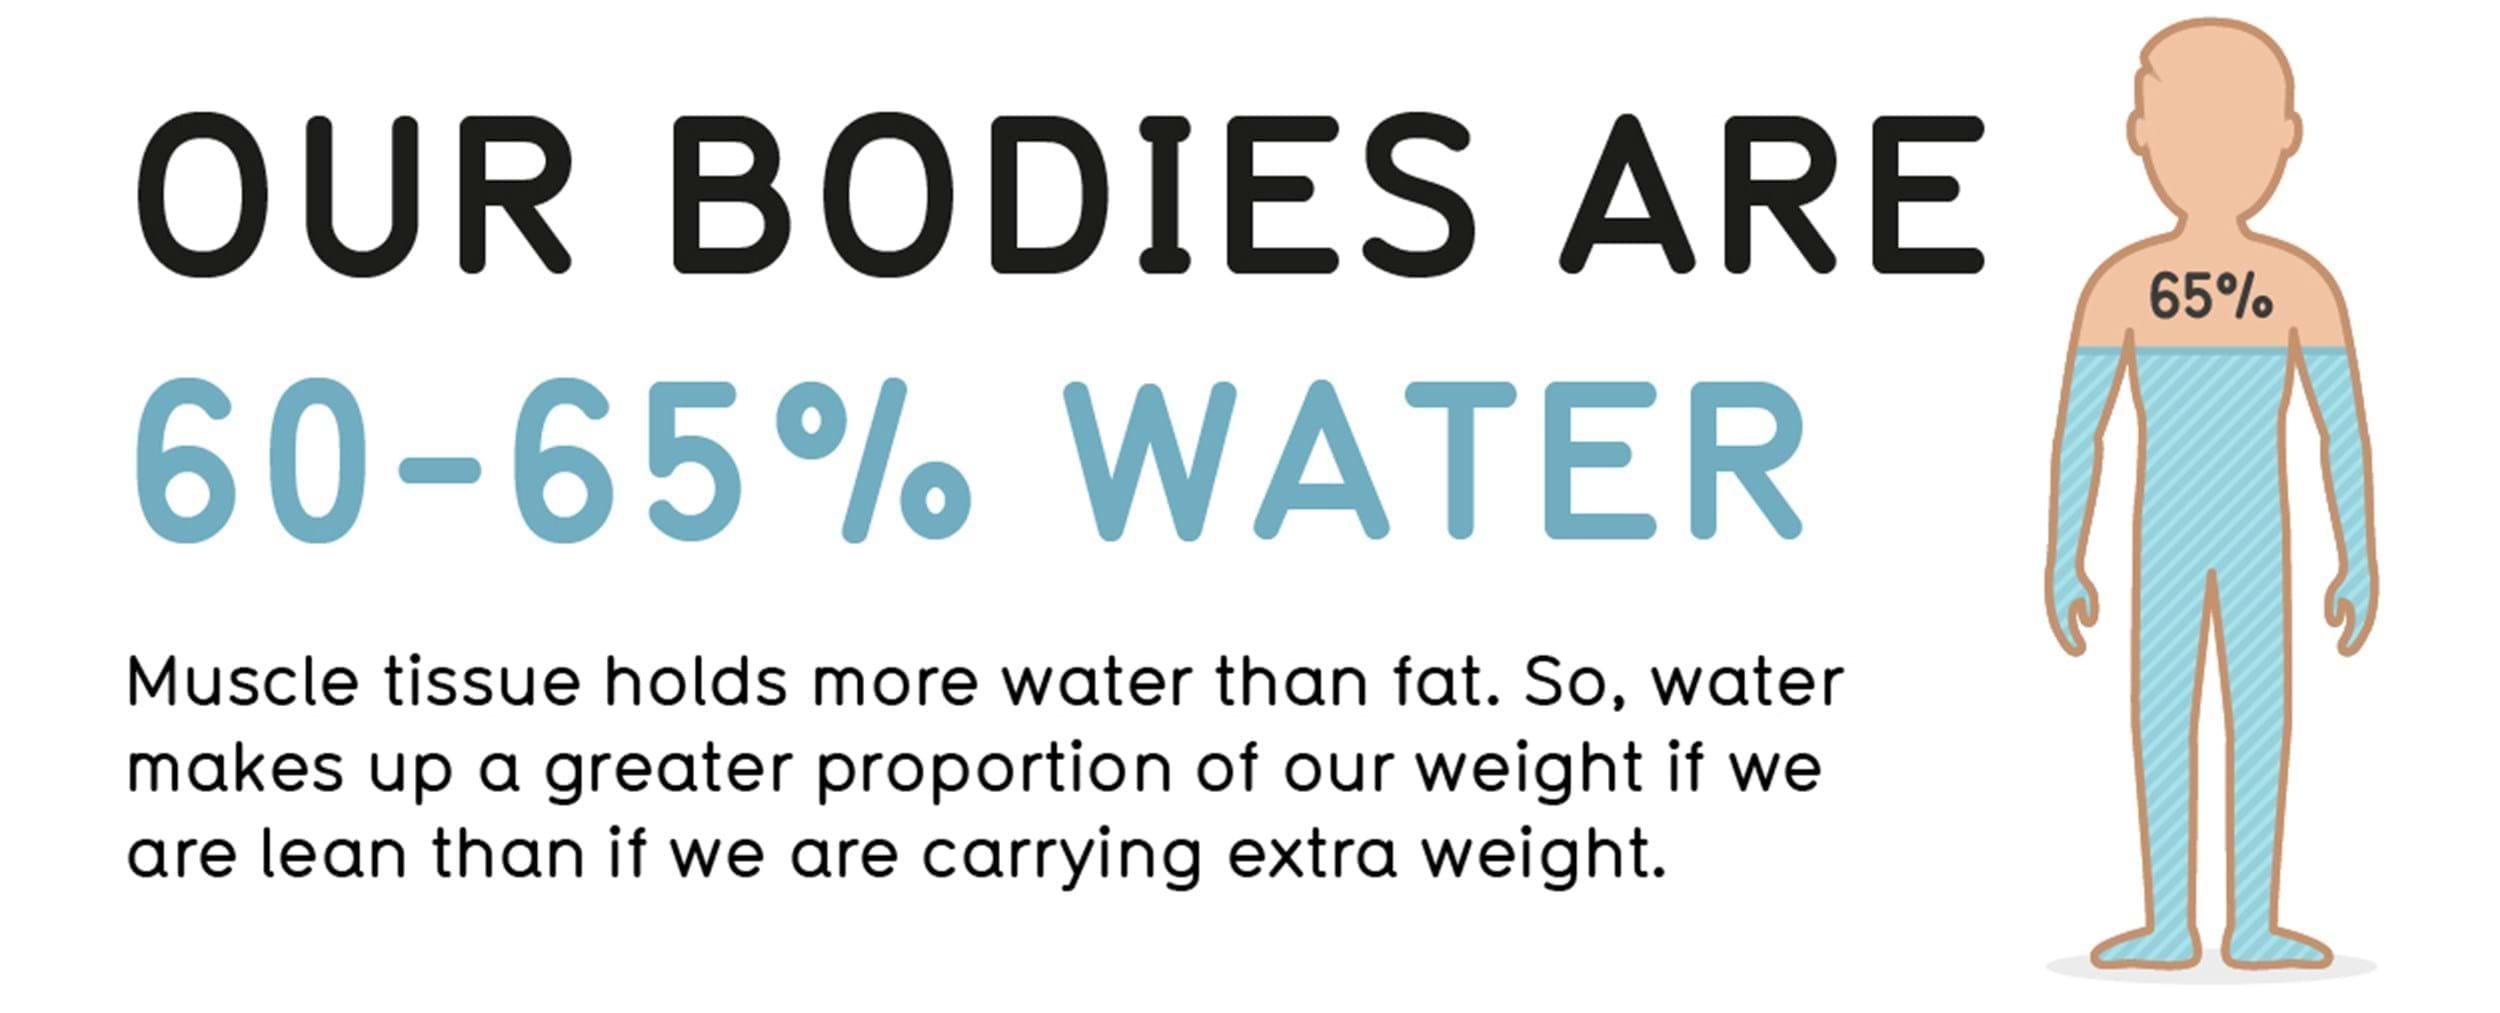 Our bodies are 60-65% water